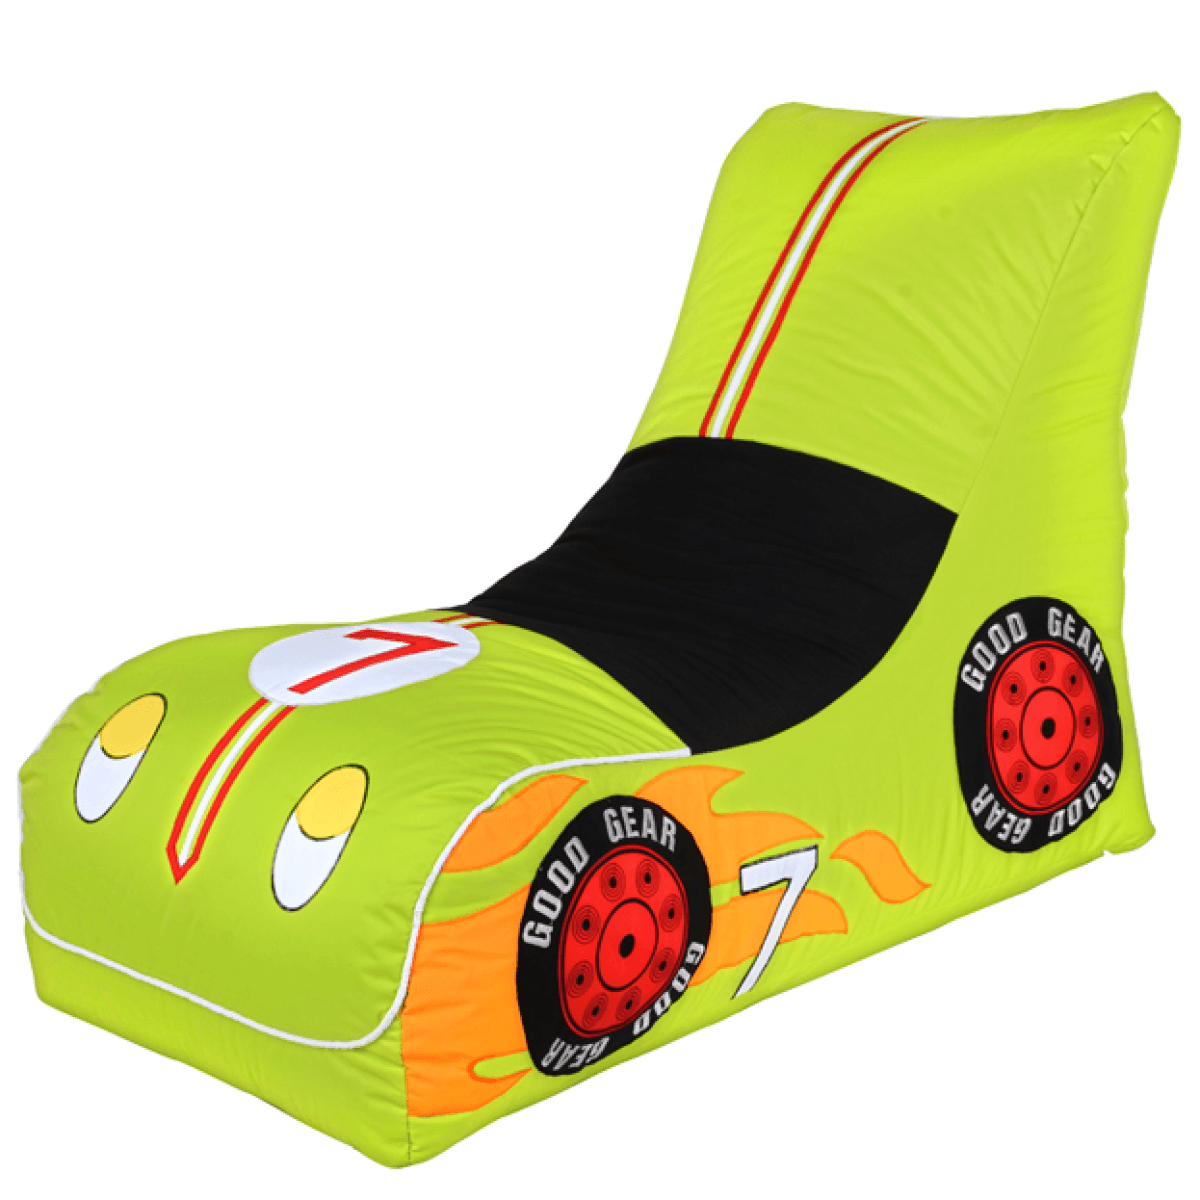 Car bean bag - Relaxsit Middle East